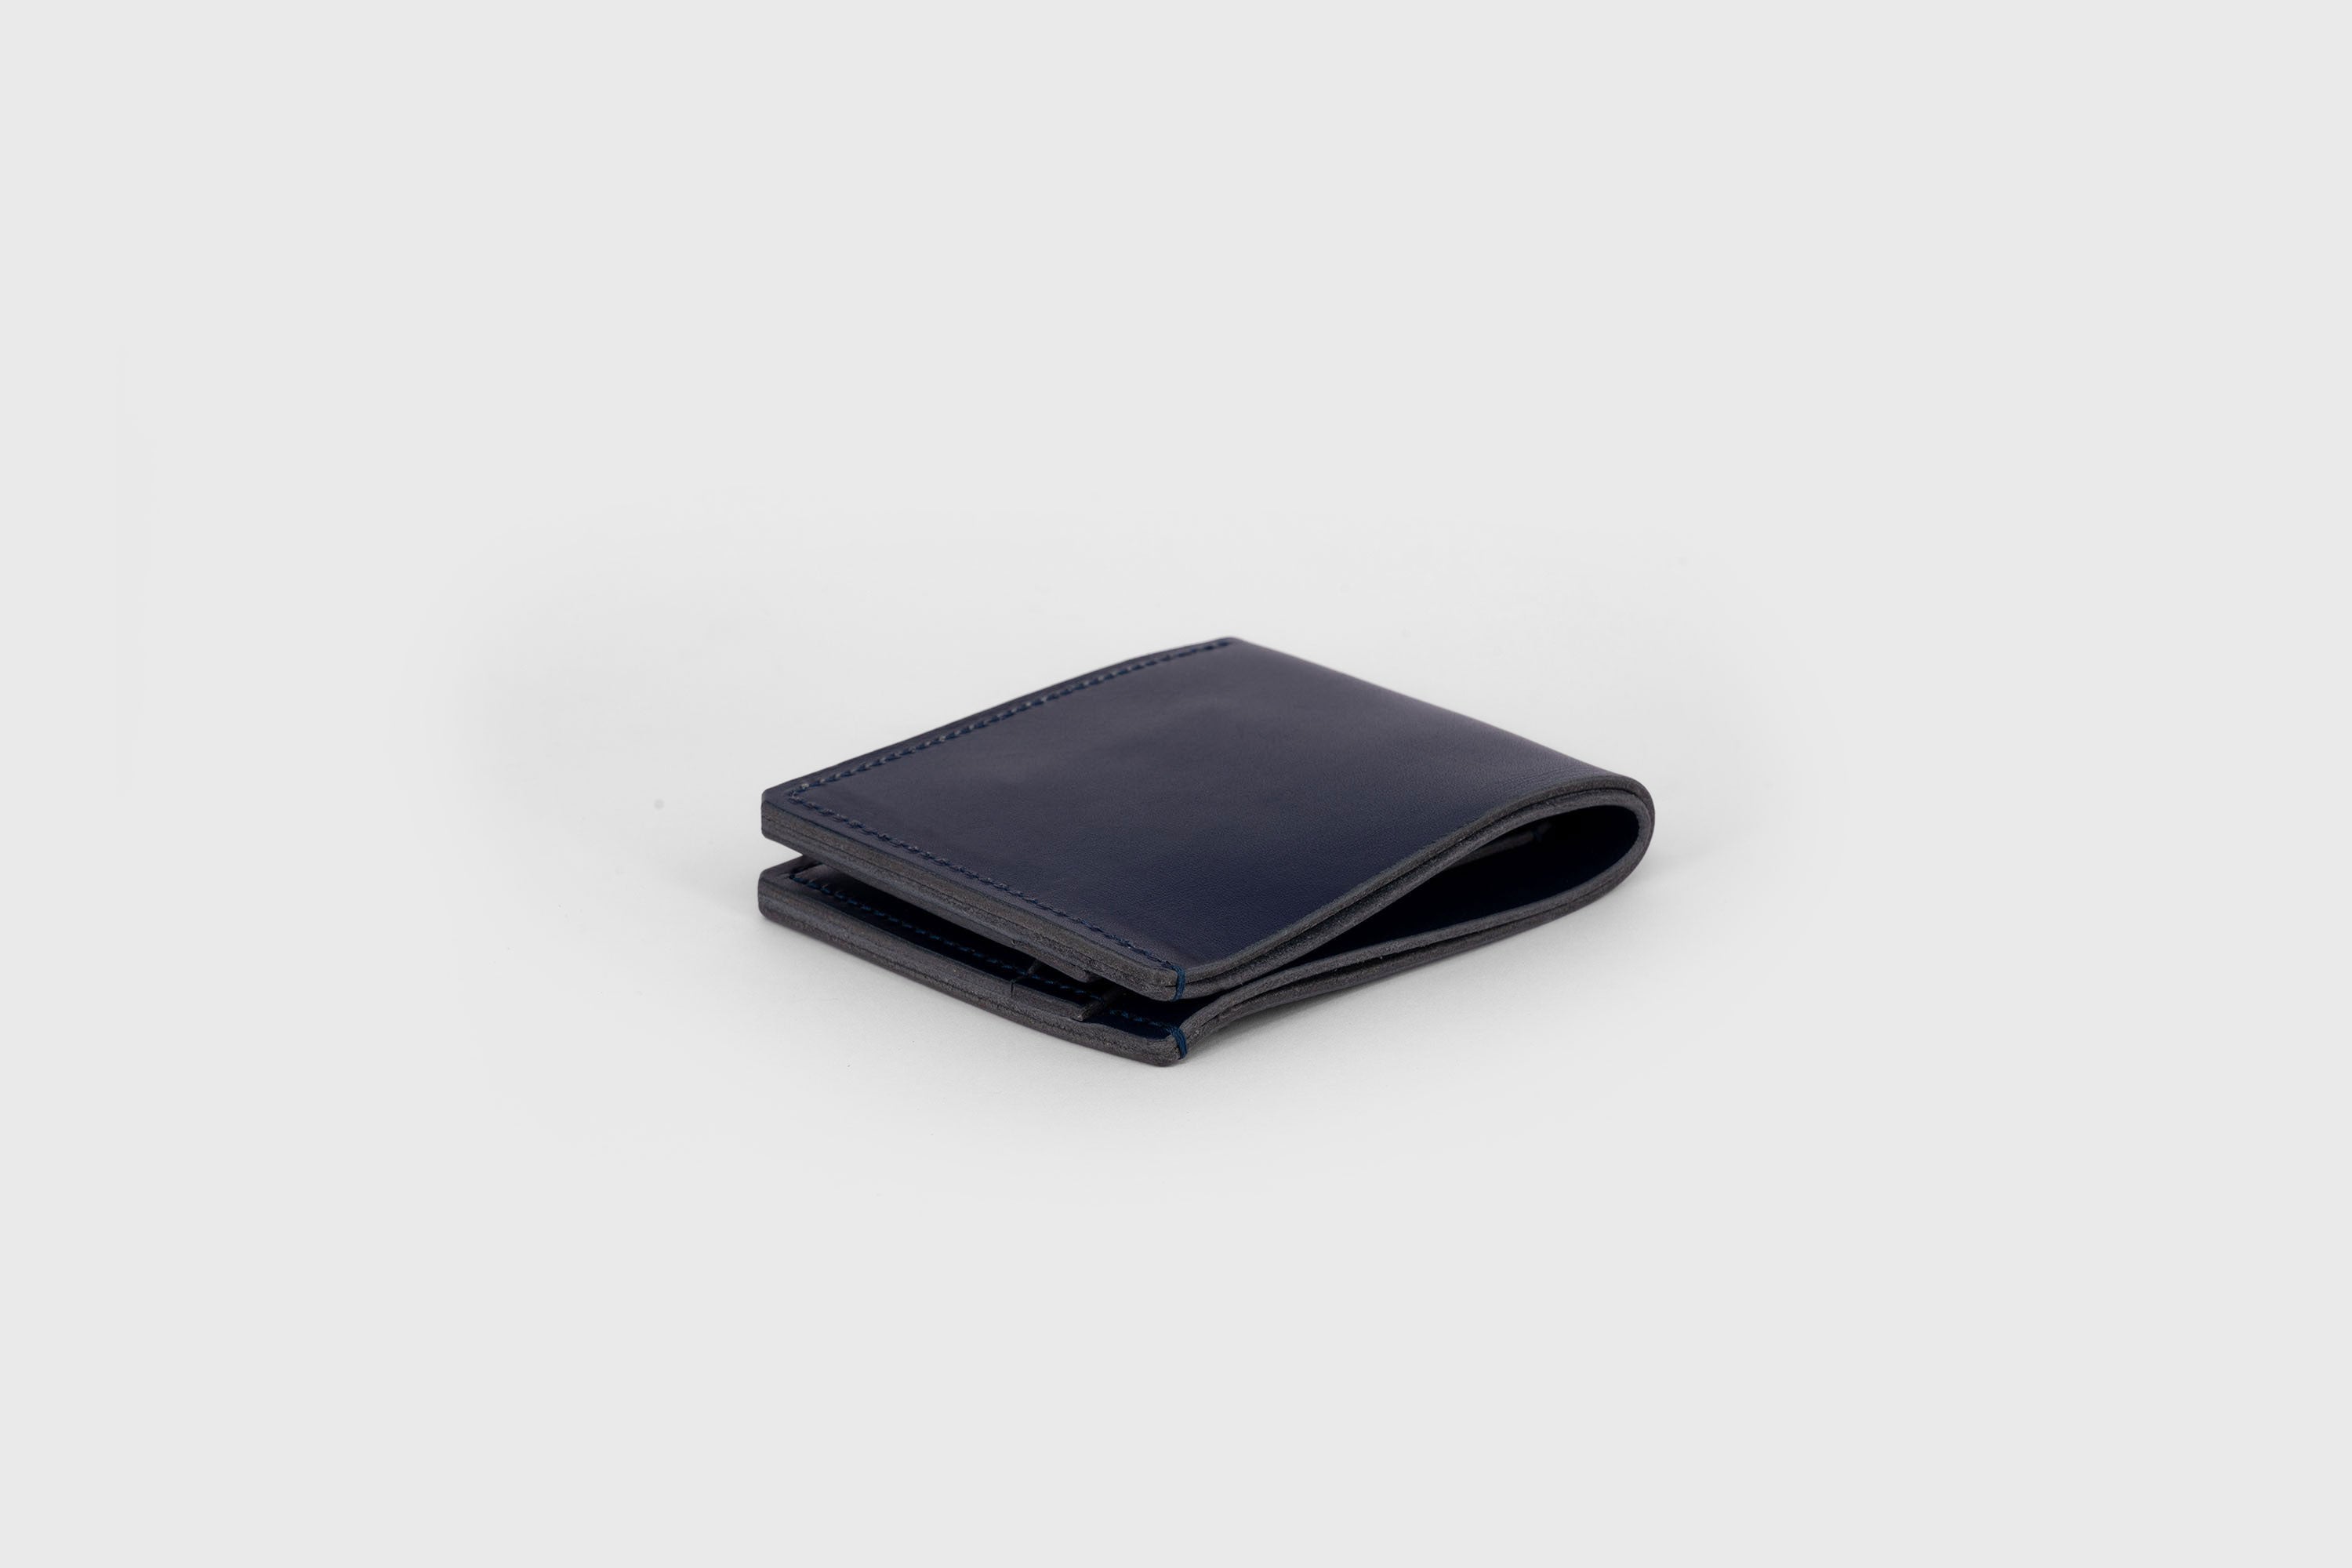 Bifold Wallet Dark Marine Blue Leather Vegetable Tanned Leather Premium Classic Design and Handcrafted By Atelier Madre Manuel Dreeesmann Barcelona Spain